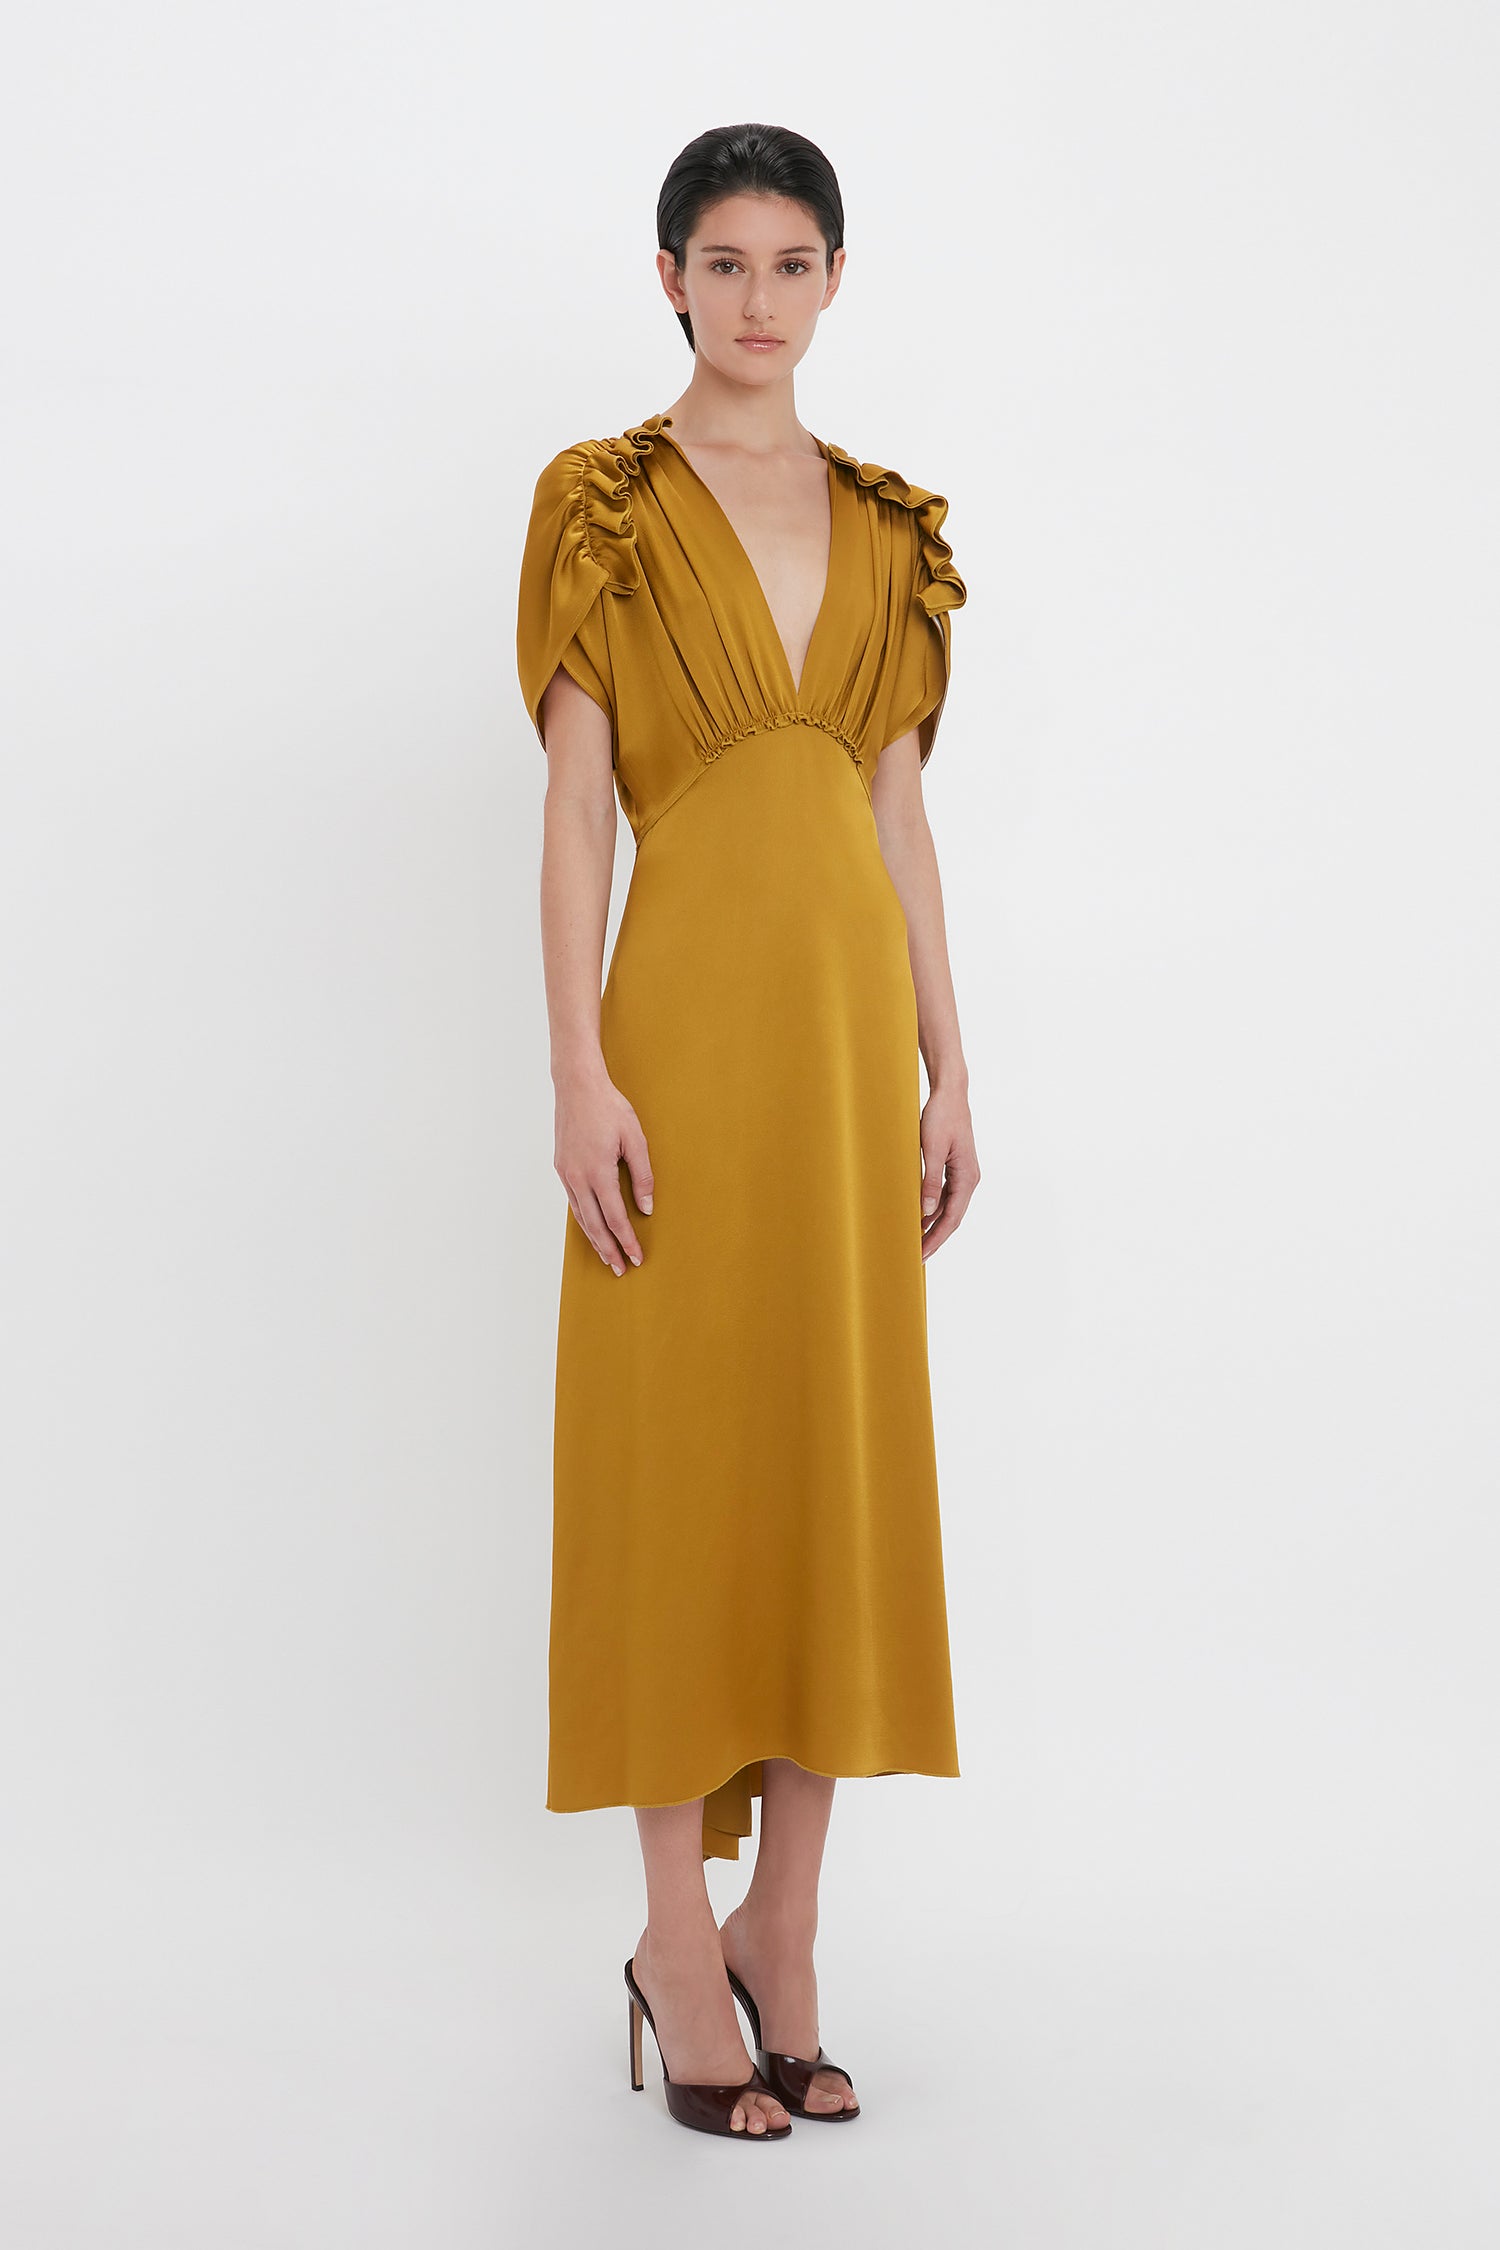 A woman stands in a studio wearing a V-Neck Ruffle Midi Dress In Harvest Gold by Victoria Beckham, paired with black peep-toe high heels. She has short, dark hair and a neutral expression.